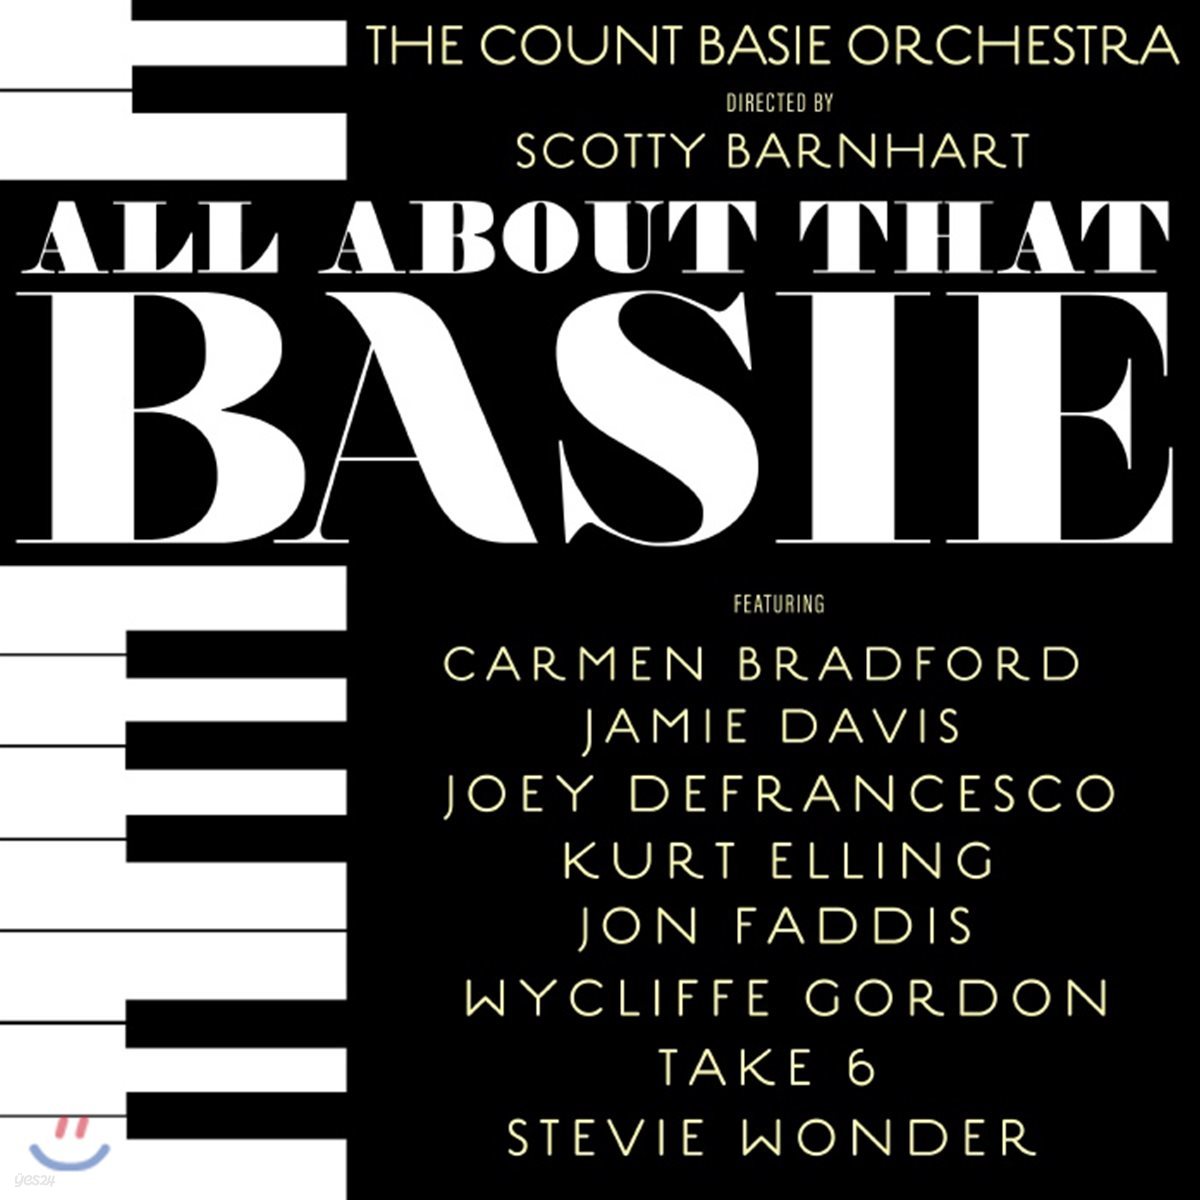 The Count Basie Orchestra (카운트 베이시 오케스트라) - All About That Basie